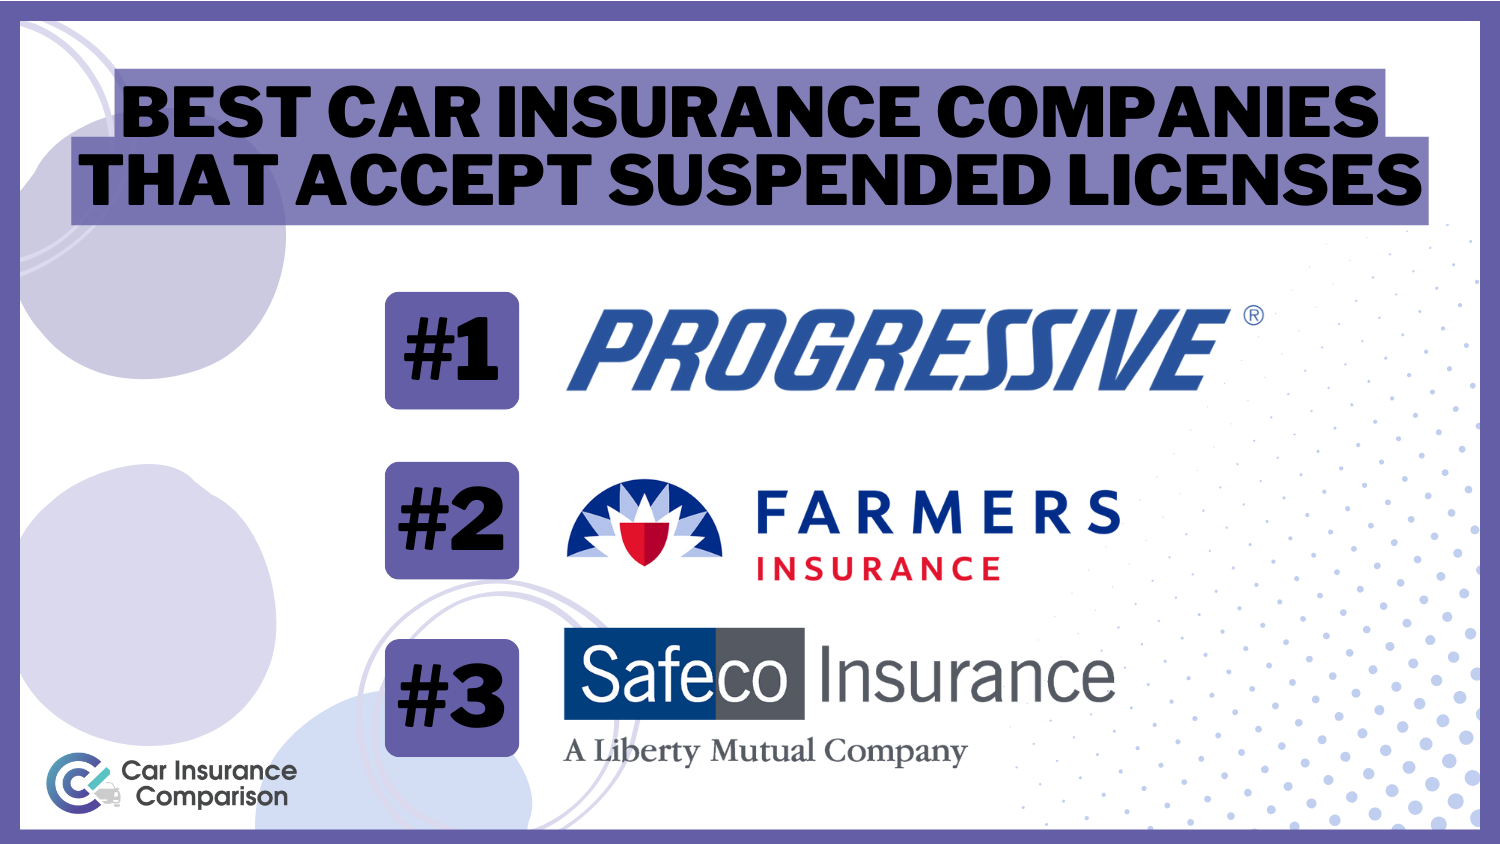 3 Best Car Insurance Companies That Accept Suspended Licenses: Progressive, Farmers, and Safeco.